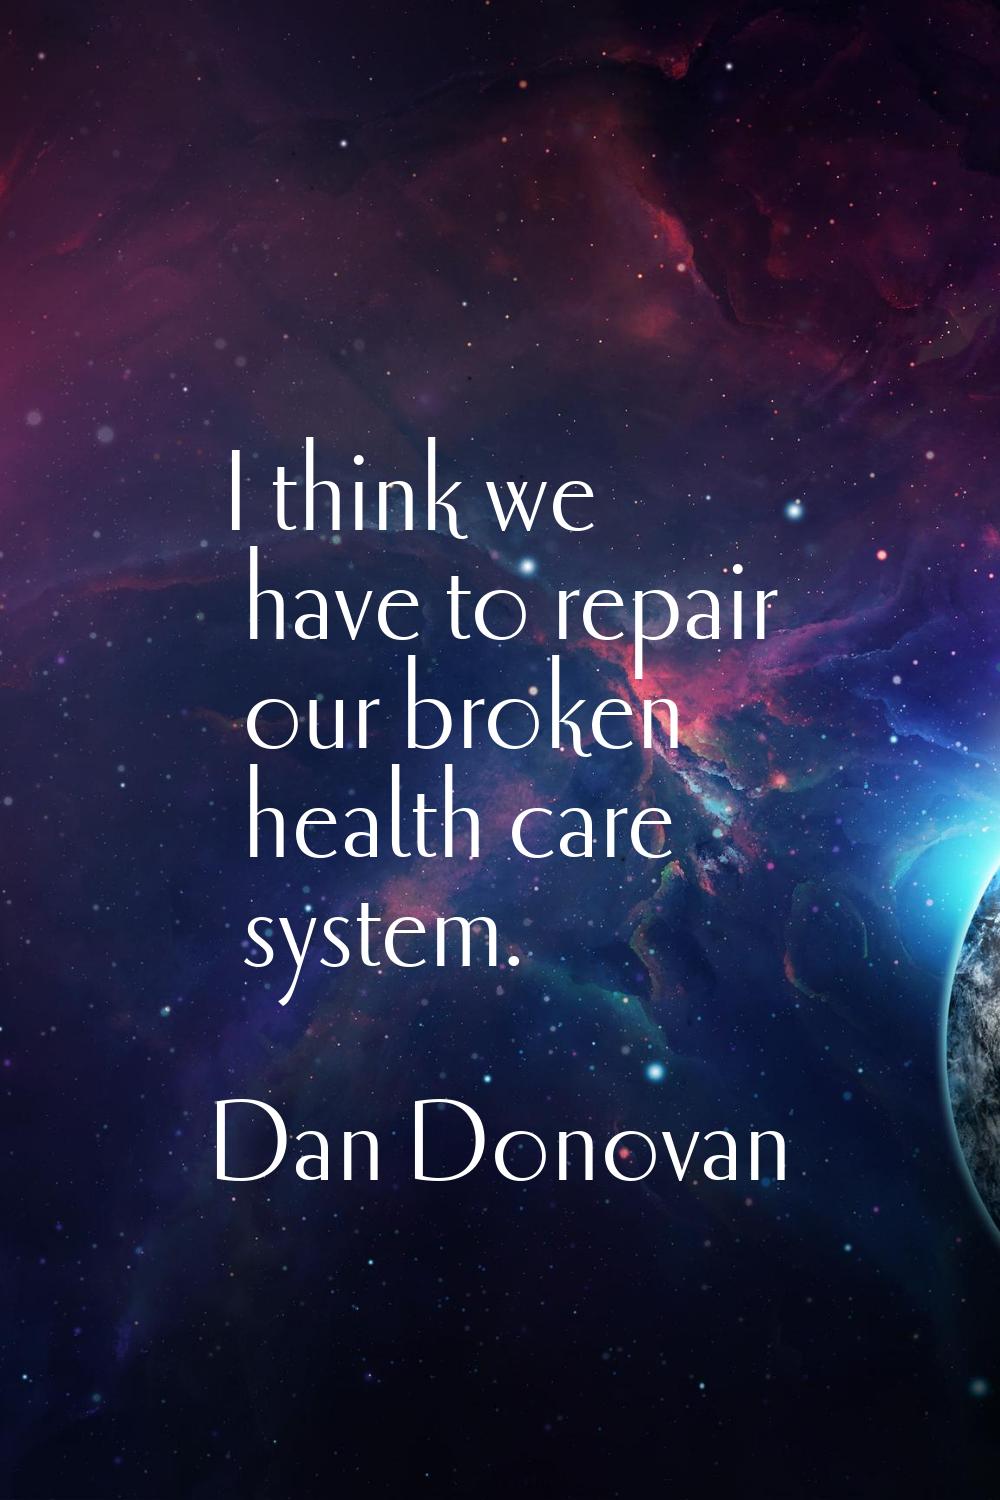 I think we have to repair our broken health care system.